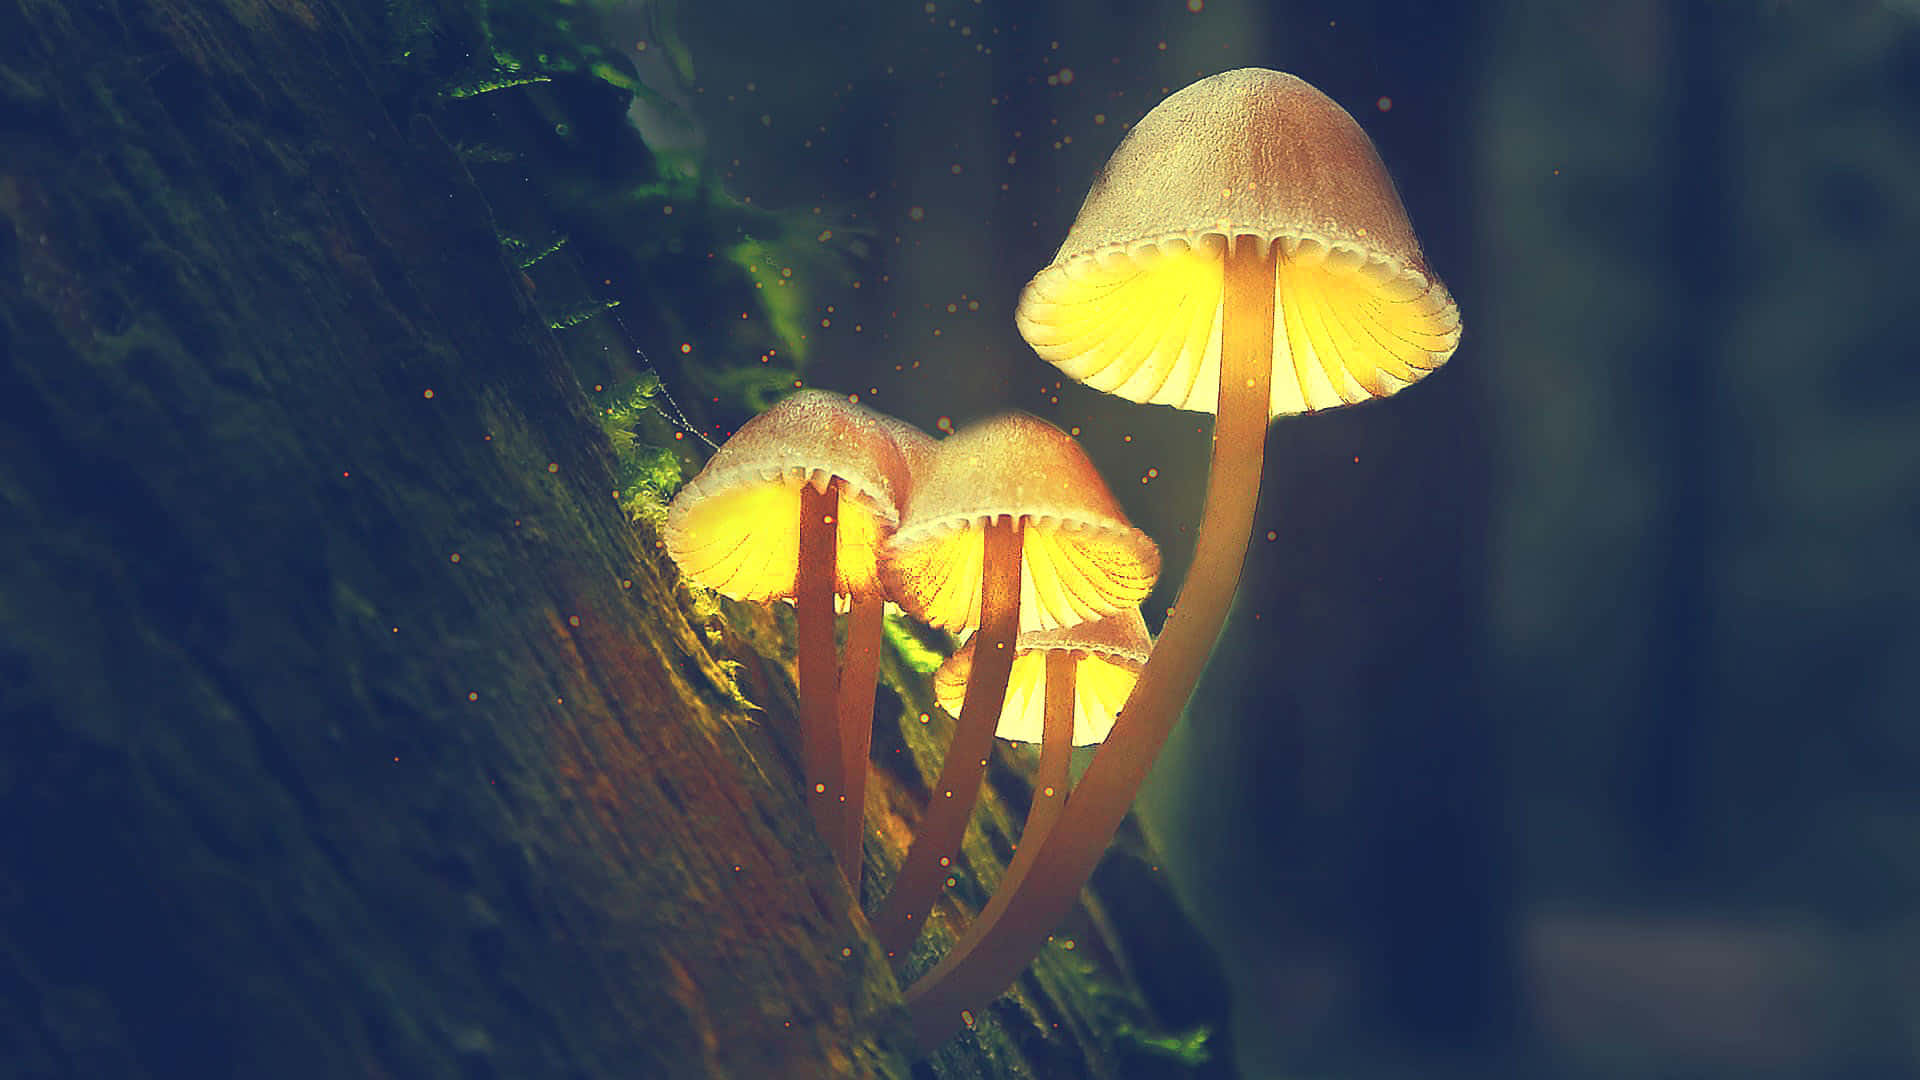 Psilocybe Fungus With Glowing Yellow Cap Wallpaper